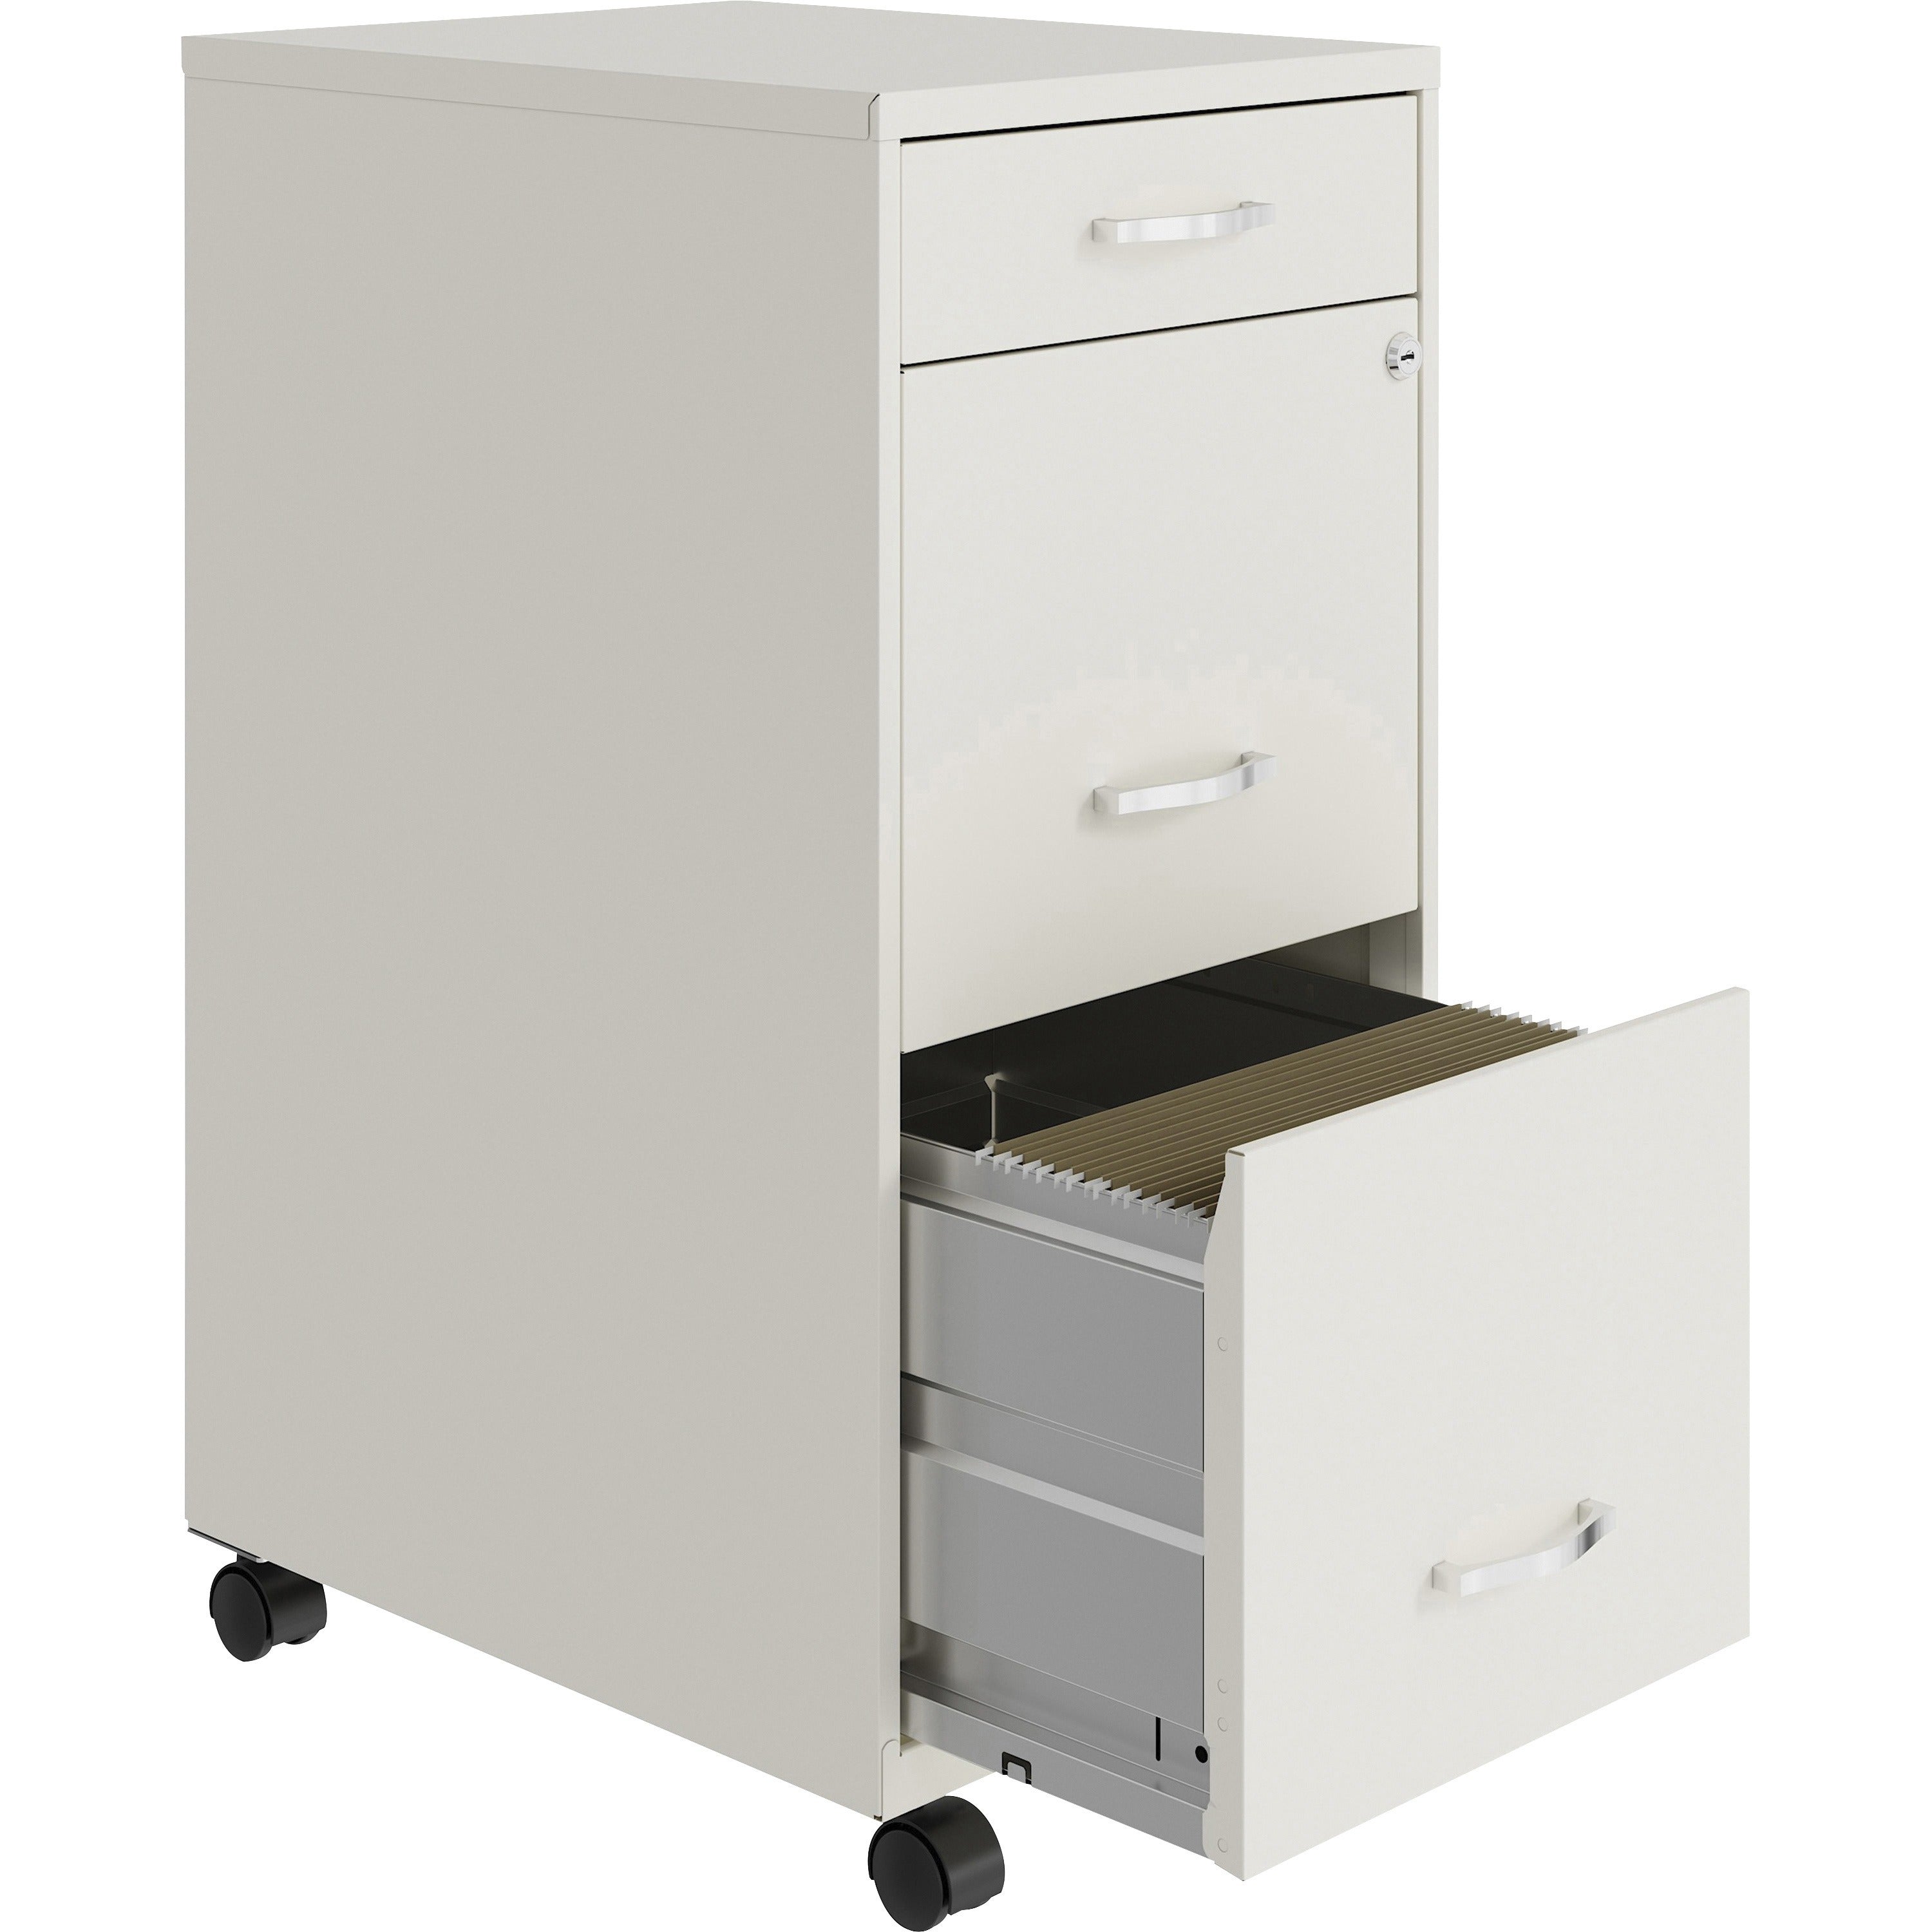 nusparc-mobile-file-cabinet-142-x-18-x-295-3-x-drawers-for-file-box-letter-mobility-locking-drawer-glide-suspension-3-4-drawer-extension-cam-lock-nonporous-surface-white-painted-steel-recycled_nprvf318bmwe - 4